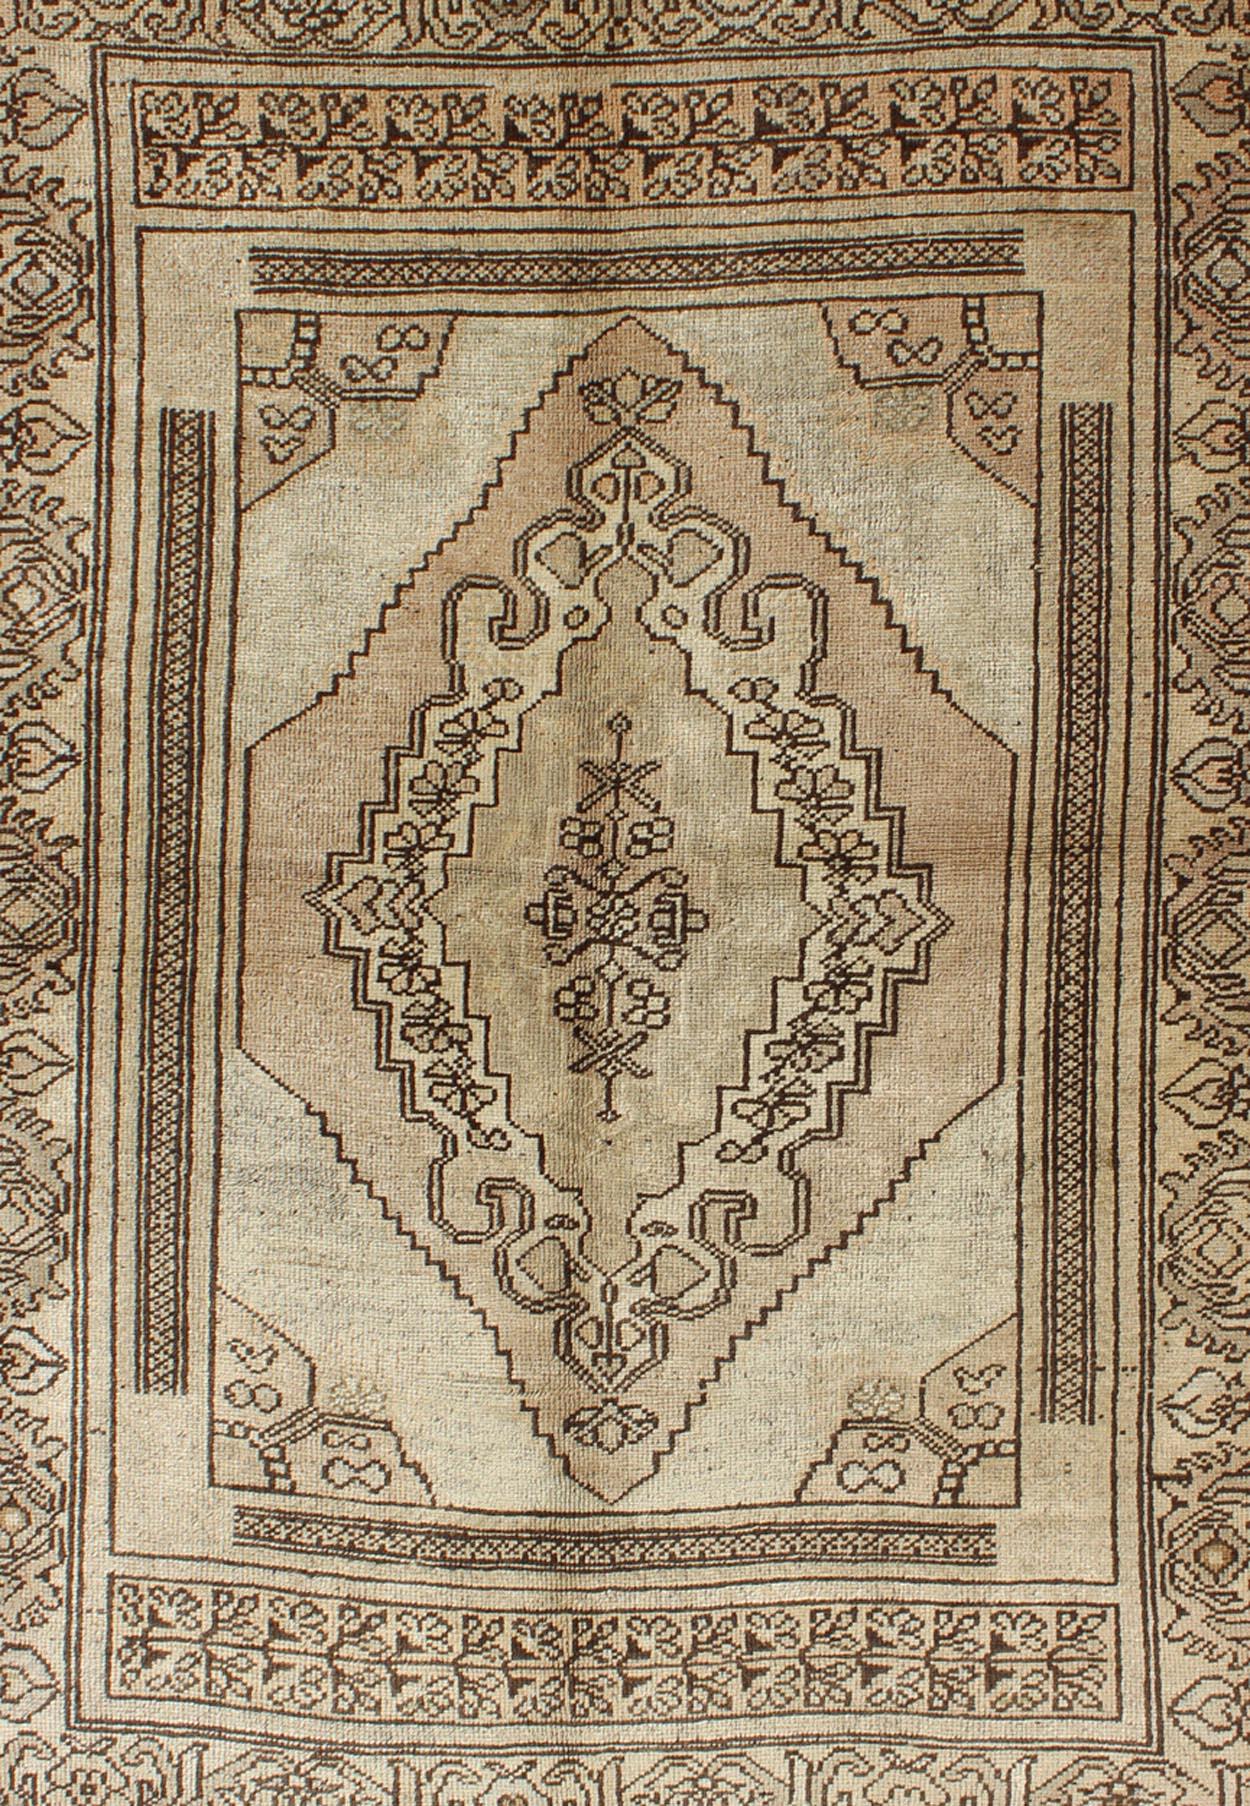 Vintage Turkish Oushak Carpet with Stylized Design in Brown, Cream, and Tan In Good Condition For Sale In Atlanta, GA